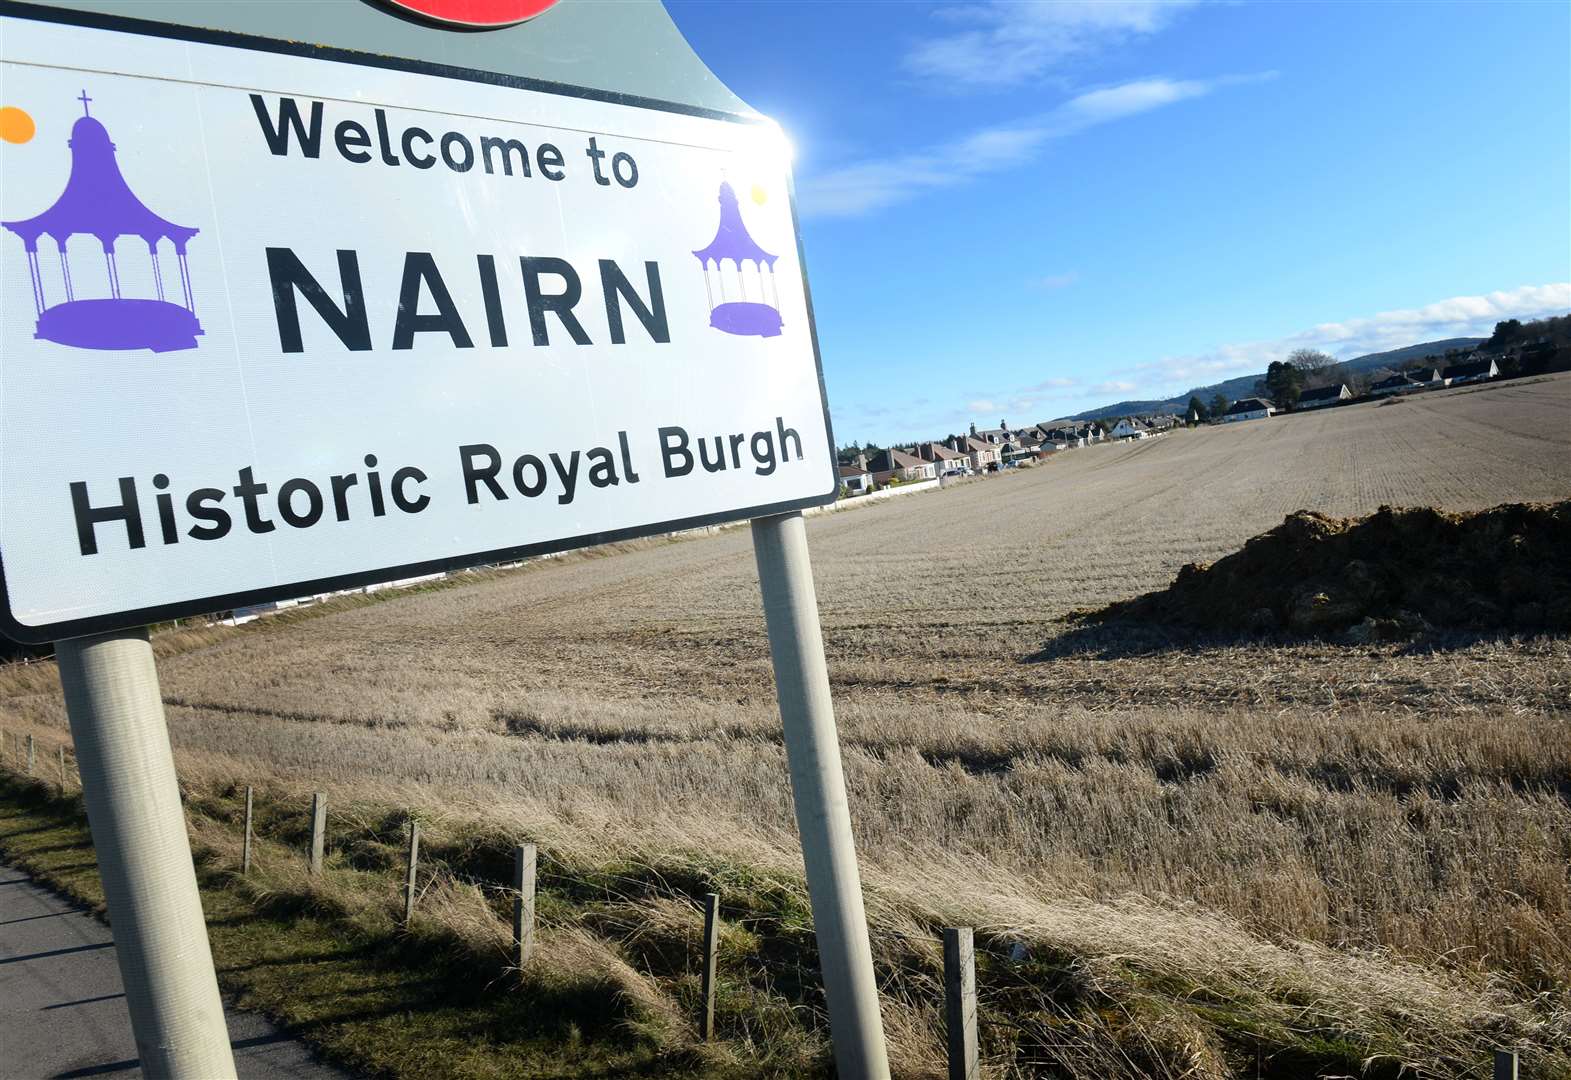 Traffic could be restricted in part of Nairn.